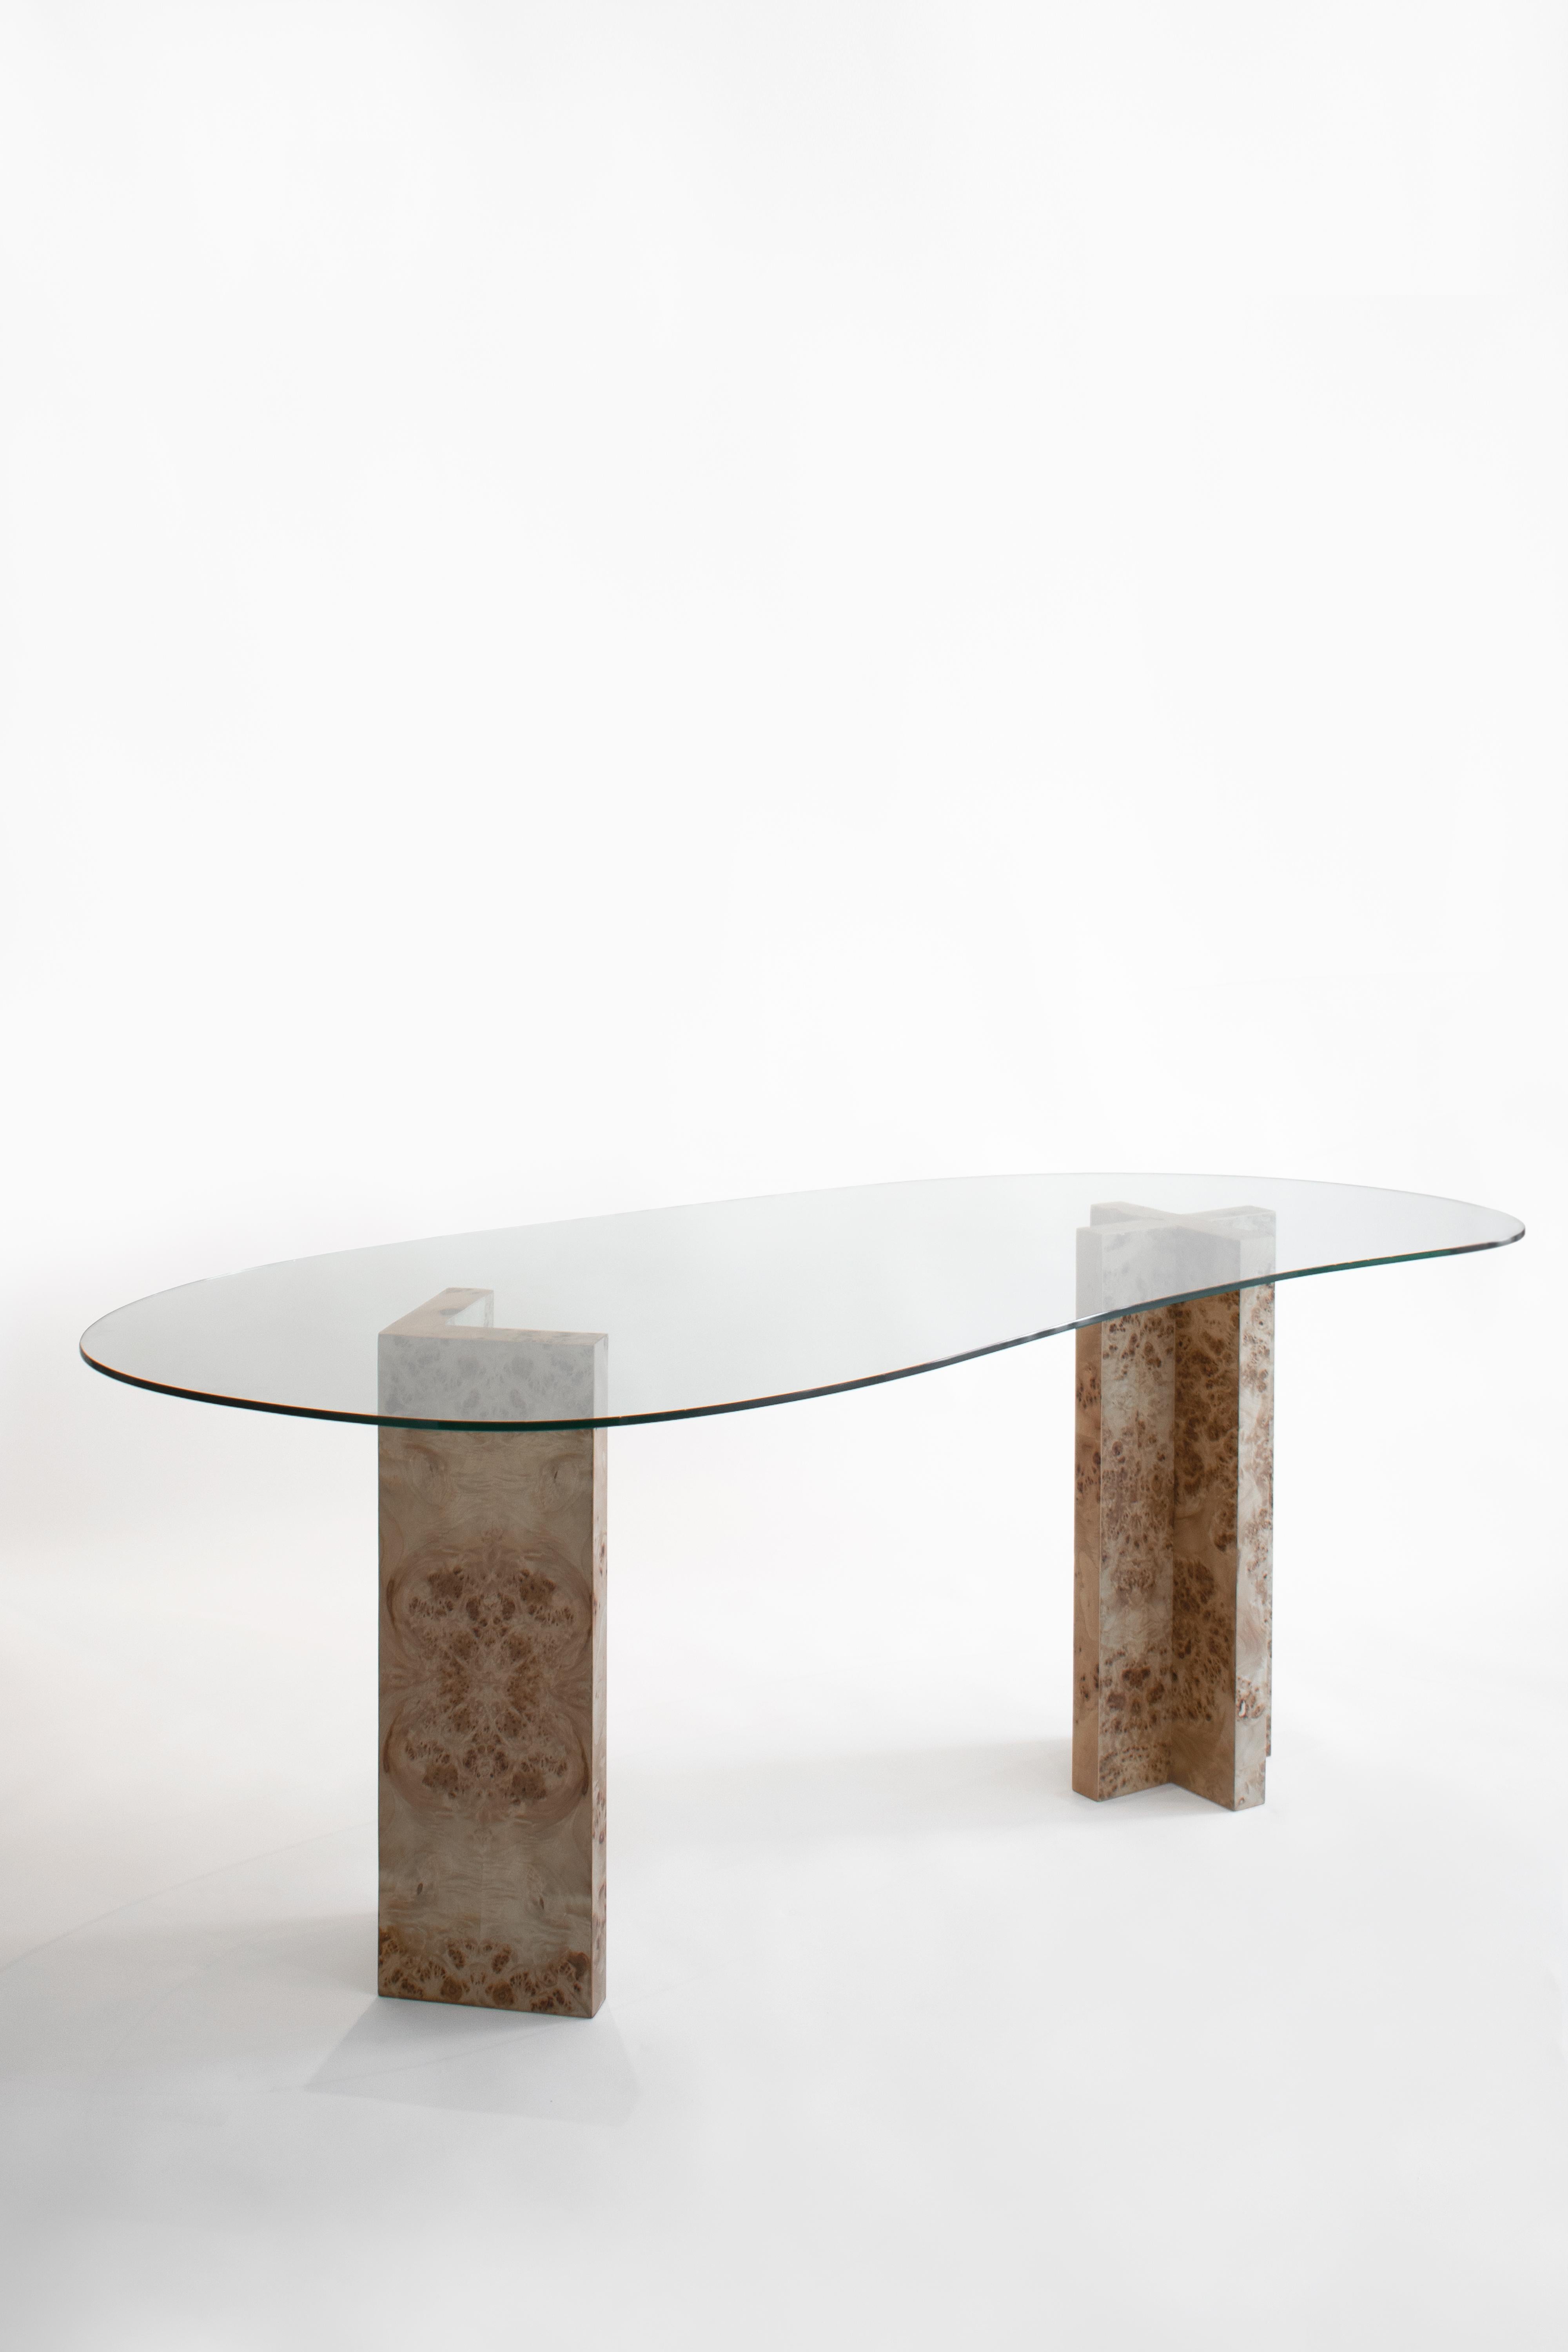 This dining table combines two seemingly opposing strategies, the robustness of its vertical supports with the lightness of its horizontal surface. The two pilas appear as extruded profiles of two typical line intersections, the cross and the right